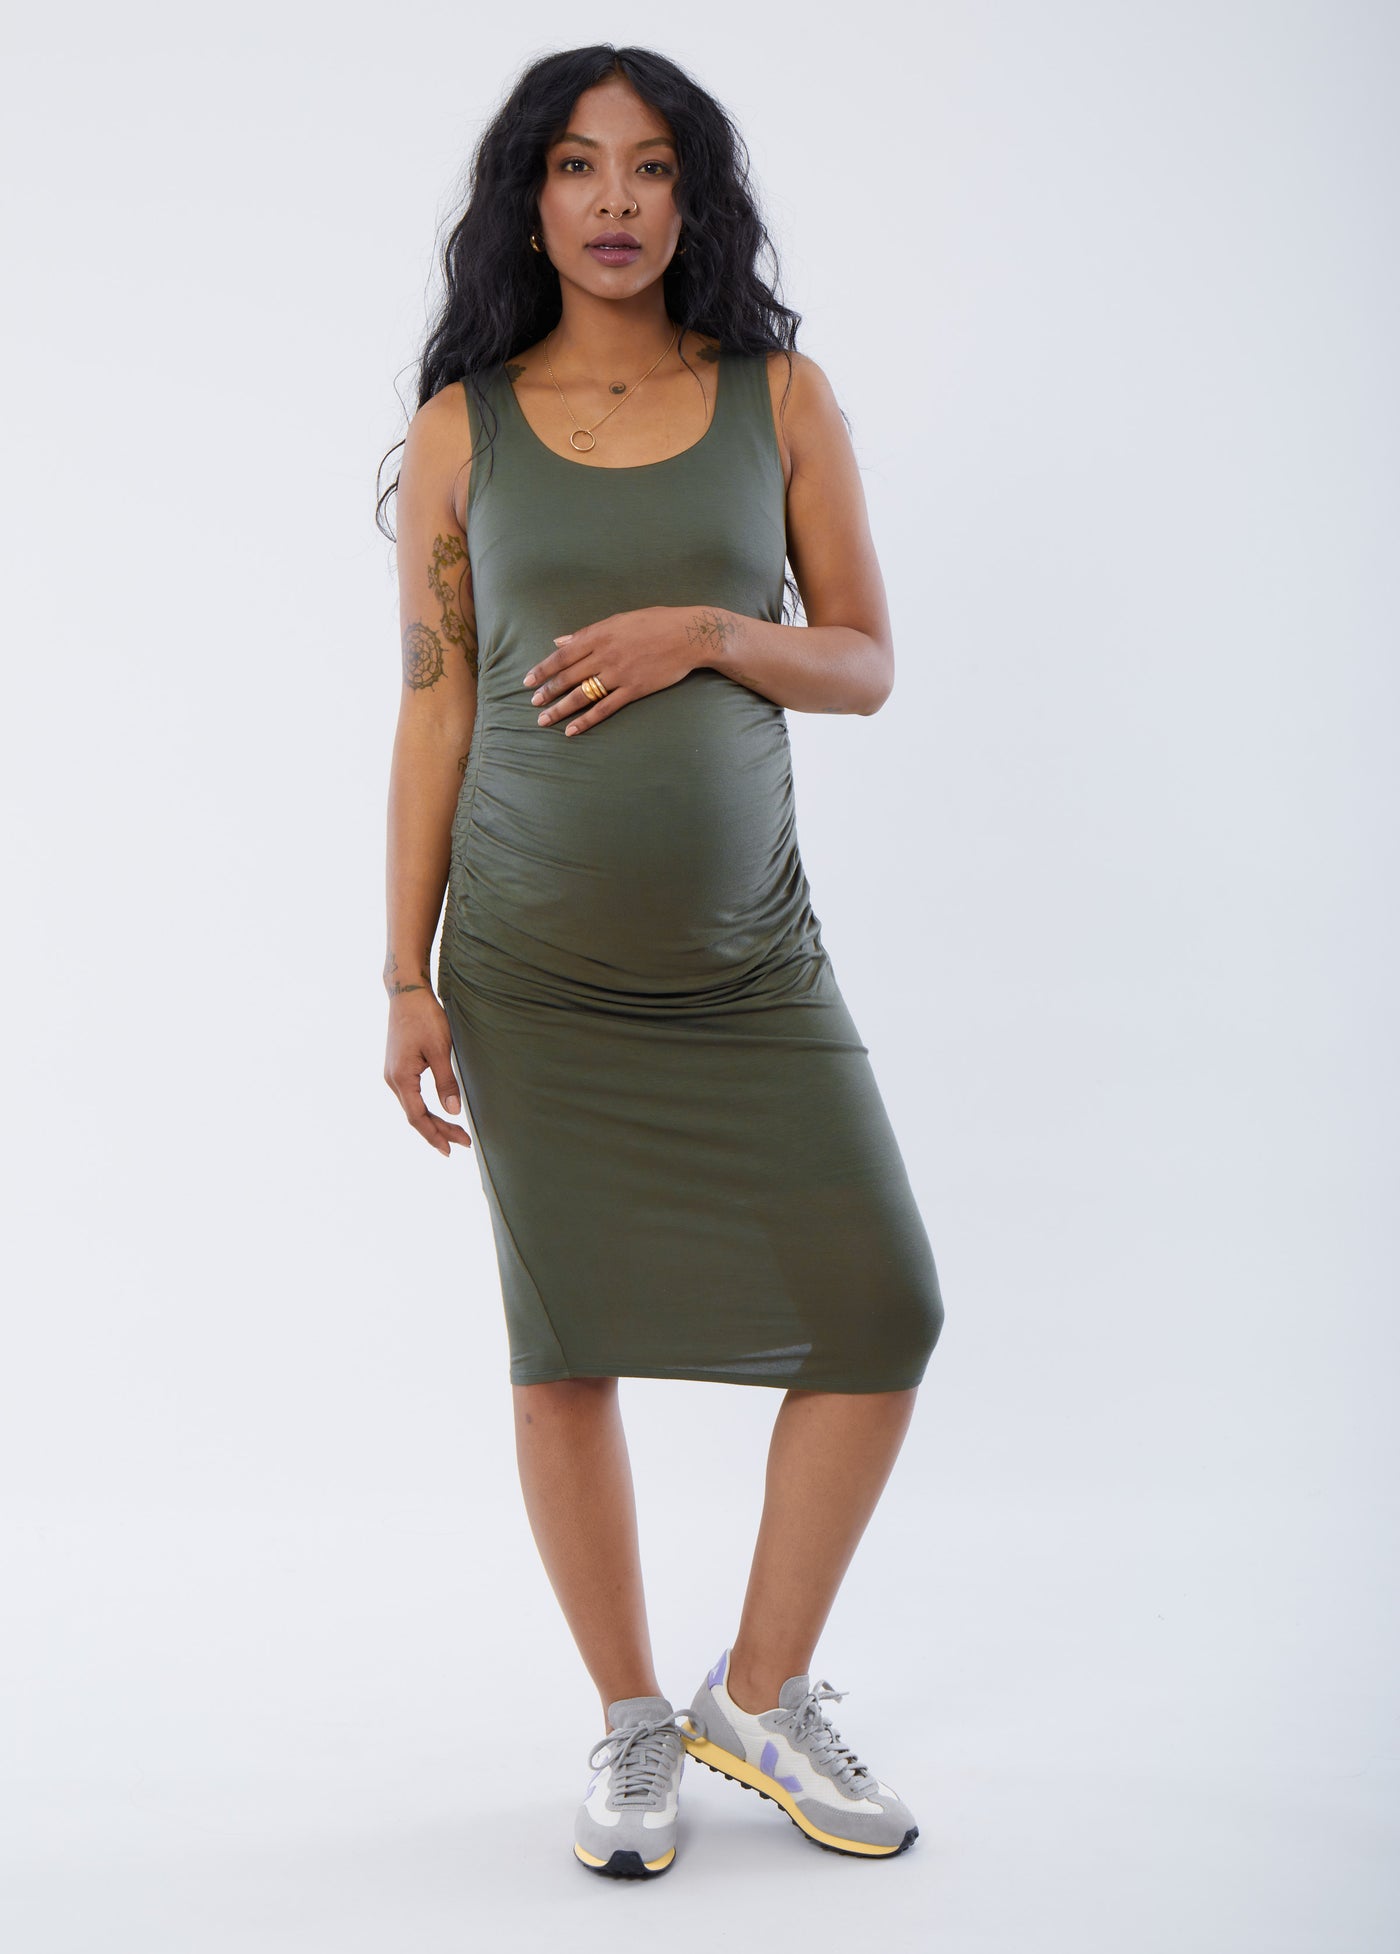 Synmia is 7 months pregnant, 5'10", wearing a size small||Olive